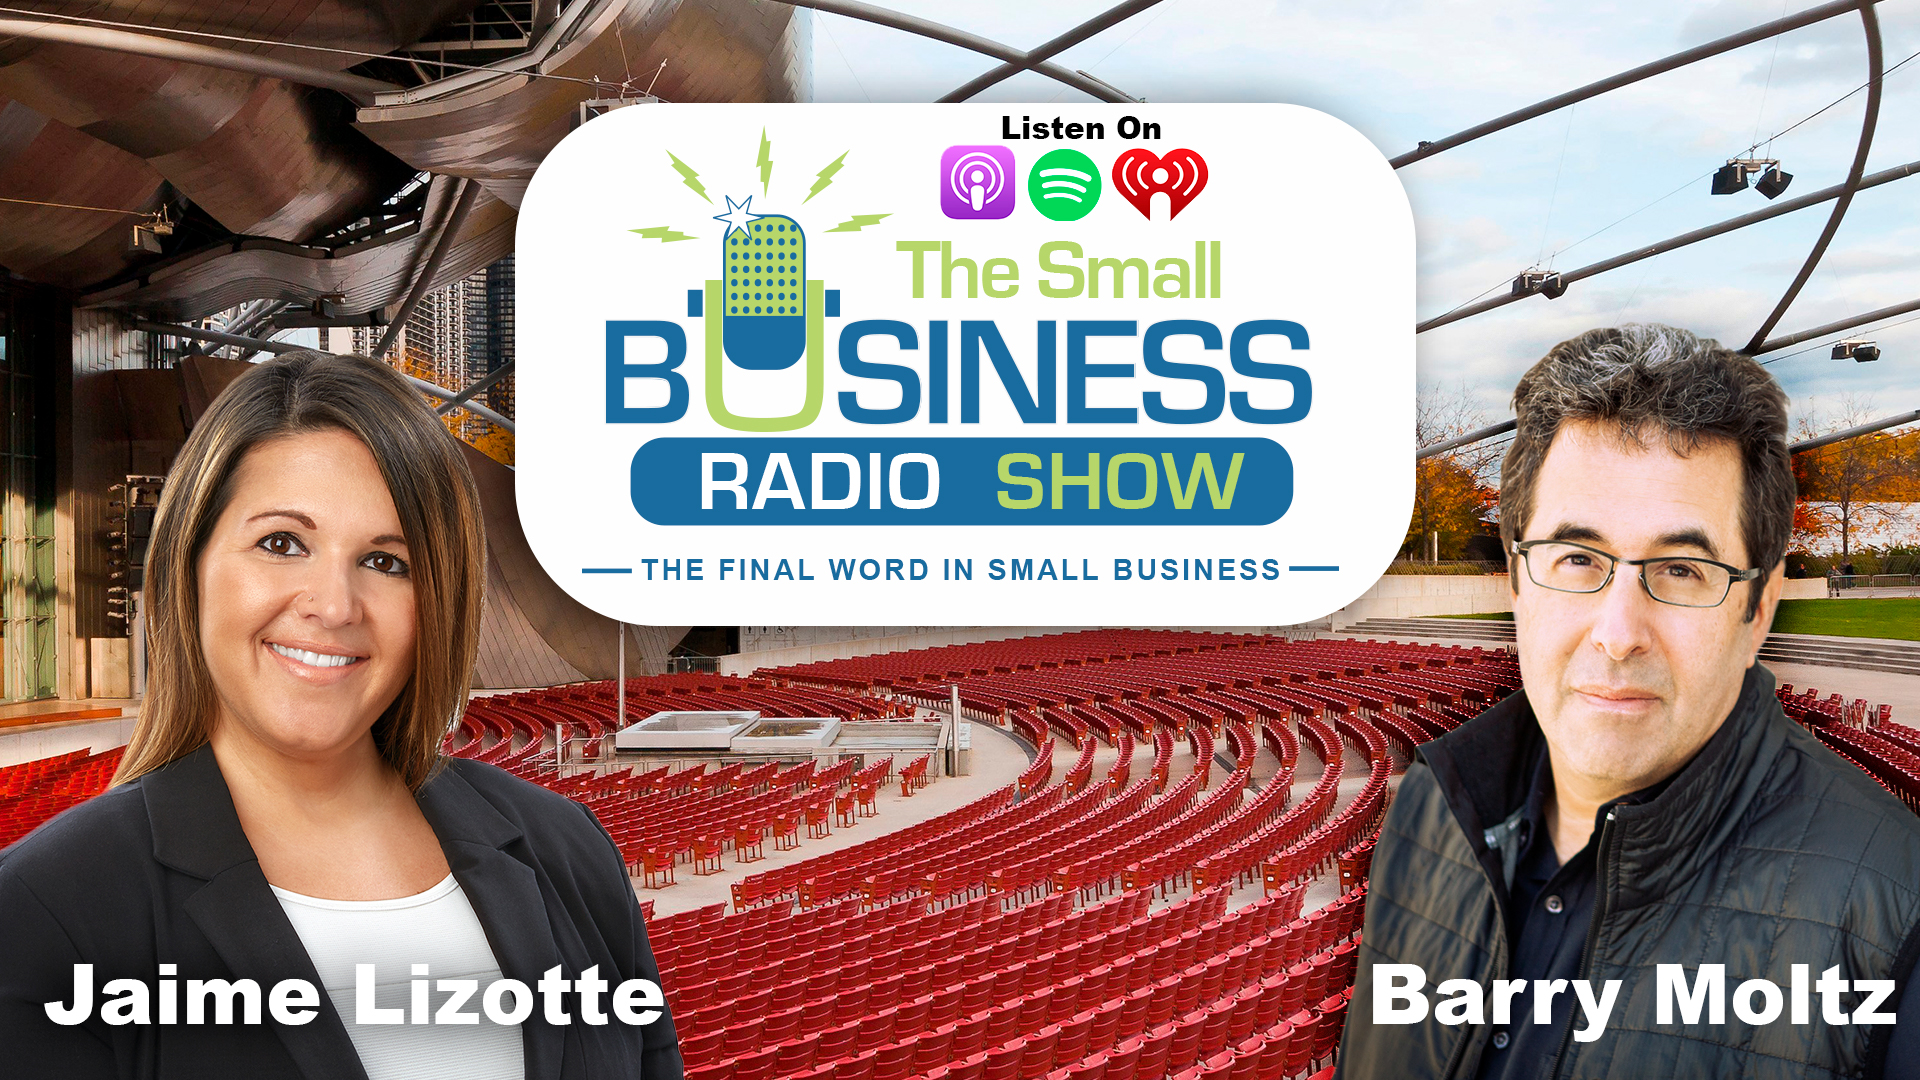 Jaime Lizotte on The Small Business Radio Show